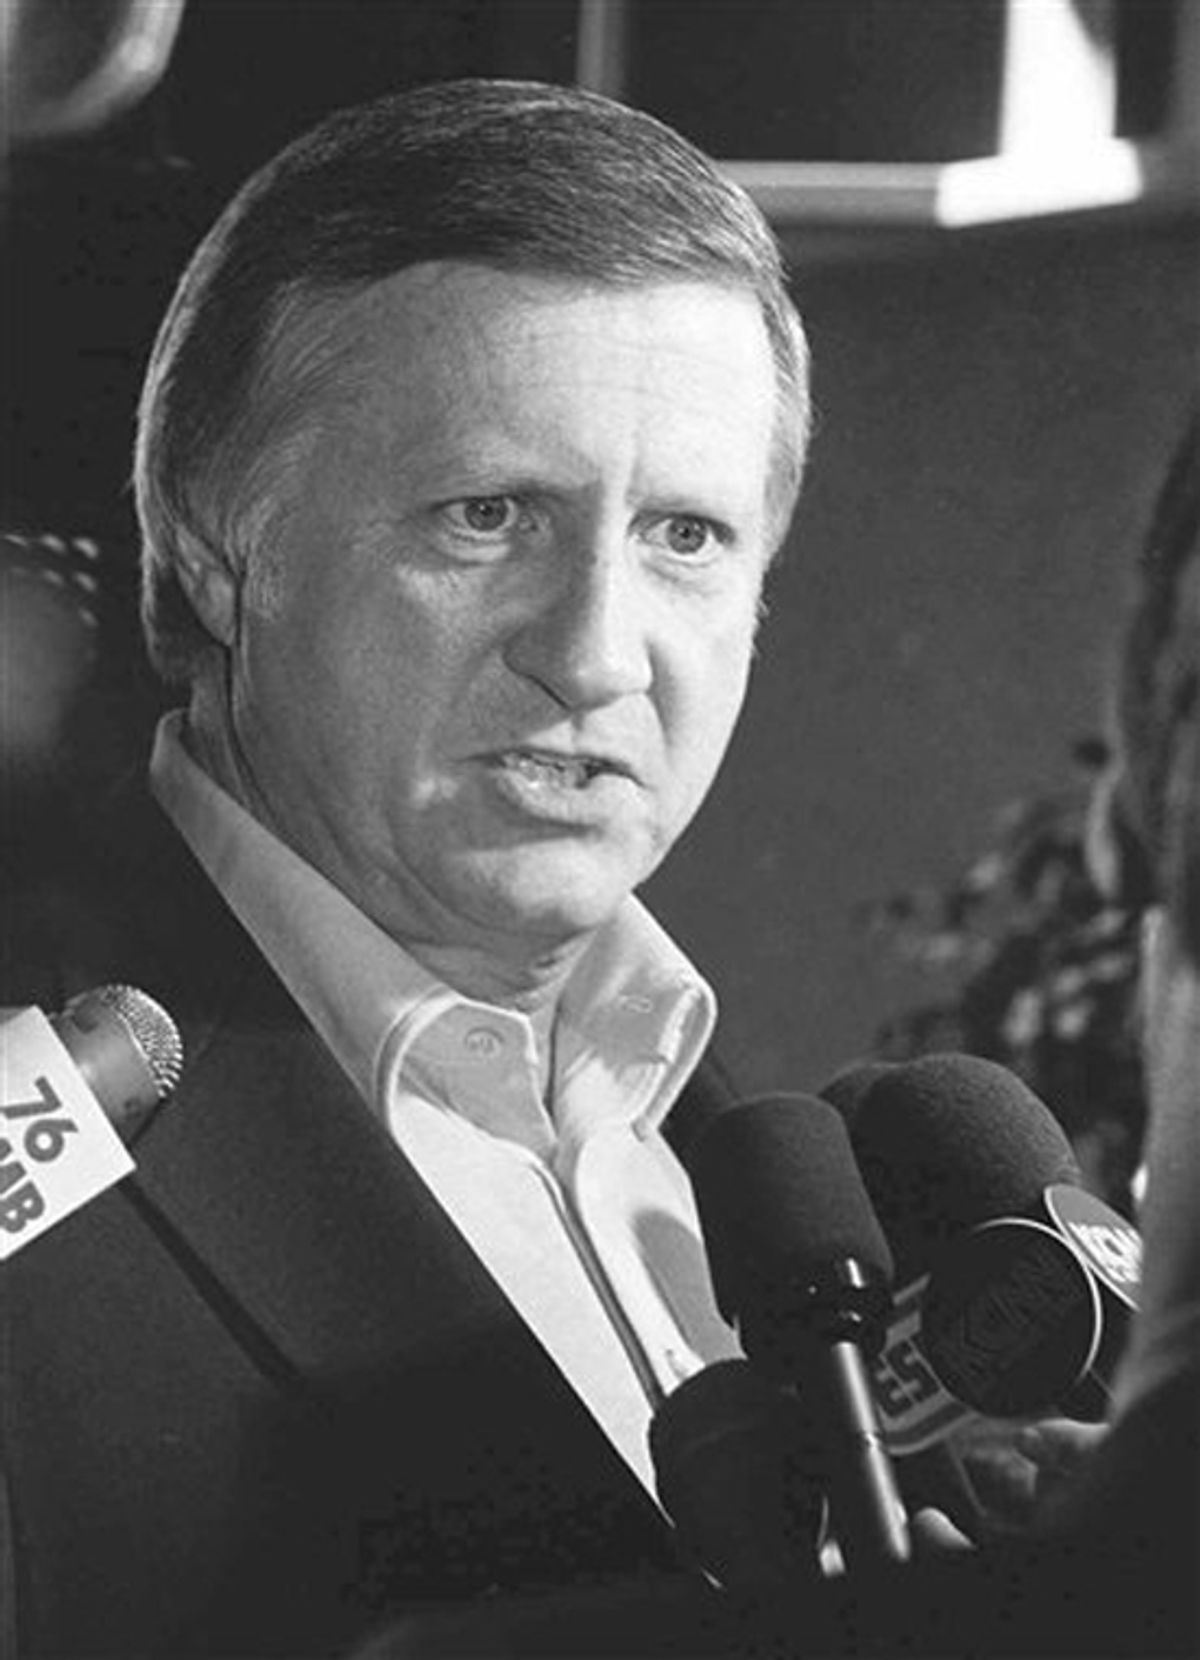 FILE - In an April 25, 1974 photo, George Steinbrenner talks with members of the press at Yankee Stadium in New York. A person close to George Steinbrenner says the Yankees owner died Tuesday morning, July 13, 2010 . (AP Photo, File) (AP)